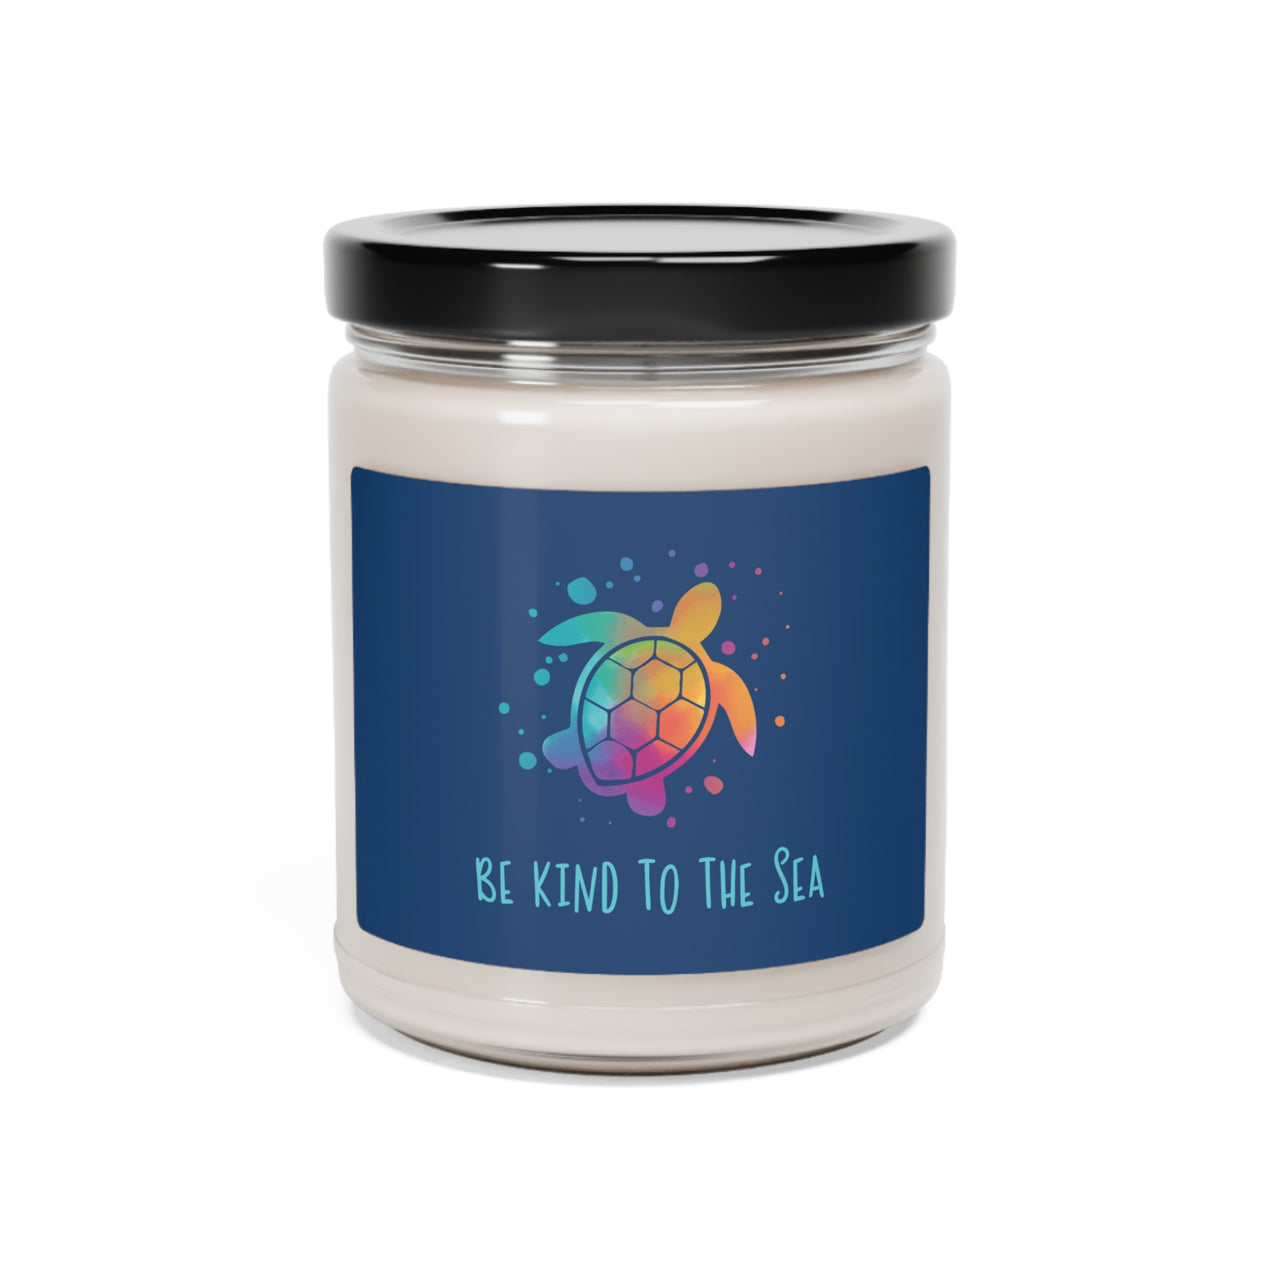 Be Kind To The Sea Scented Soy Candle, Coastal Candles, 4 Scents